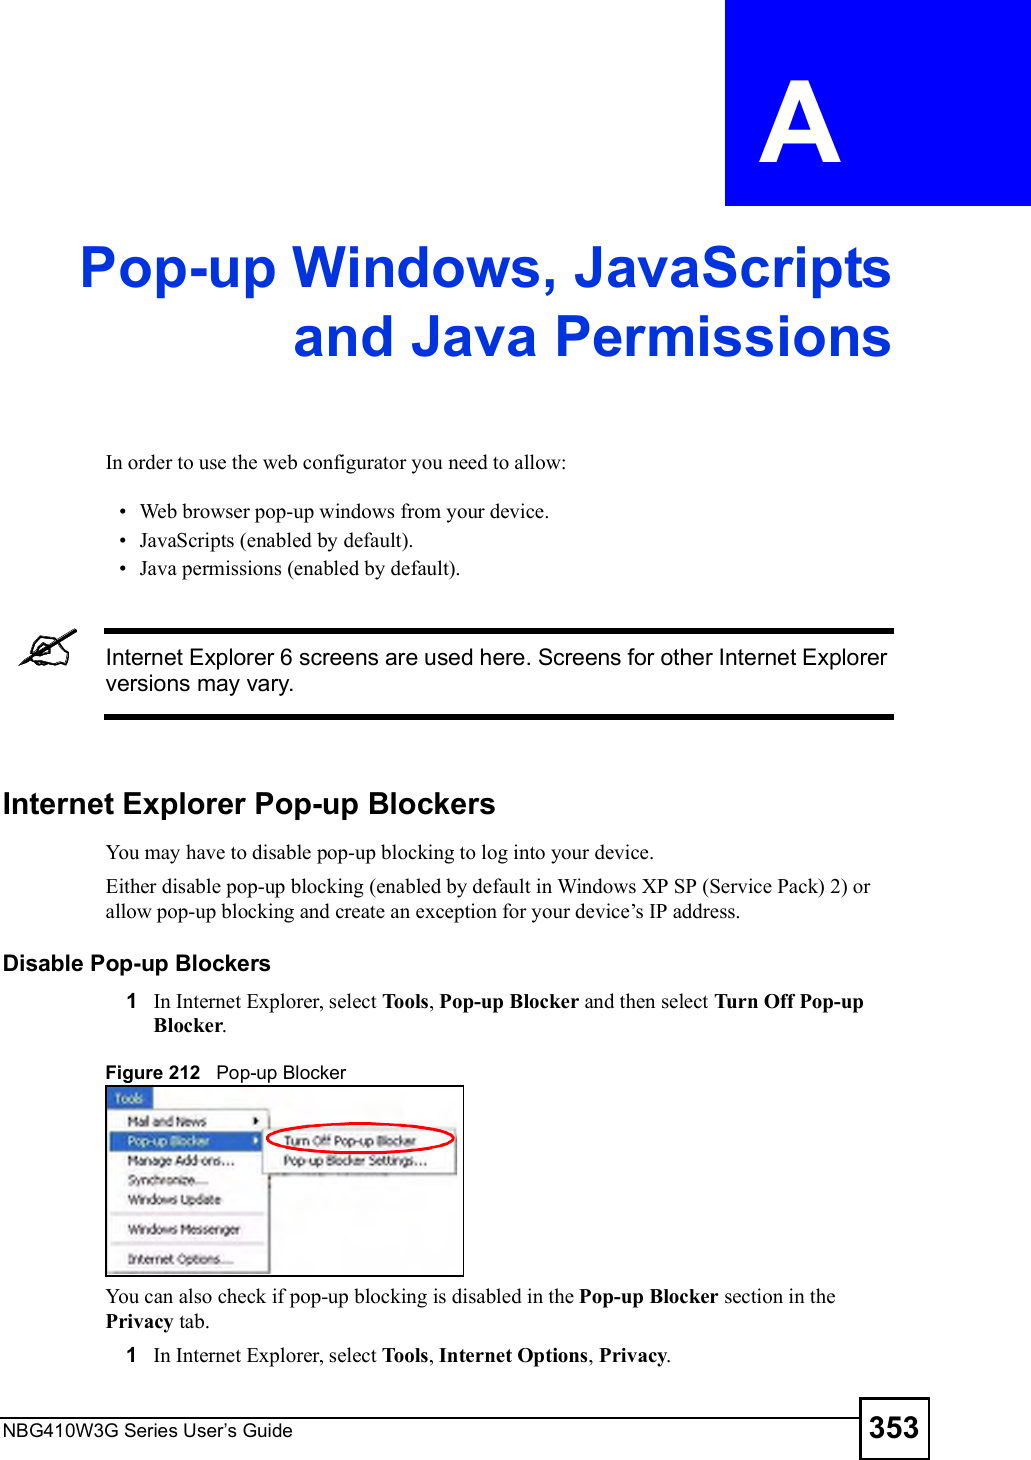 NBG410W3G Series User s Guide 353APPENDIX  A Pop-up Windows, JavaScriptsand Java PermissionsIn order to use the web configurator you need to allow: Web browser pop-up windows from your device. JavaScripts (enabled by default). Java permissions (enabled by default).Internet Explorer 6 screens are used here. Screens for other Internet Explorer versions may vary.Internet Explorer Pop-up BlockersYou may have to disable pop-up blocking to log into your device. Either disable pop-up blocking (enabled by default in Windows XP SP (Service Pack) 2) or allow pop-up blocking and create an exception for your device!s IP address.Disable Pop-up Blockers1In Internet Explorer, select Tools, Pop-up Blocker and then select Turn Off Pop-up Blocker. Figure 212   Pop-up BlockerYou can also check if pop-up blocking is disabled in the Pop-up Blocker section in the Privacy tab. 1In Internet Explorer, select Tools, Internet Options, Privacy.